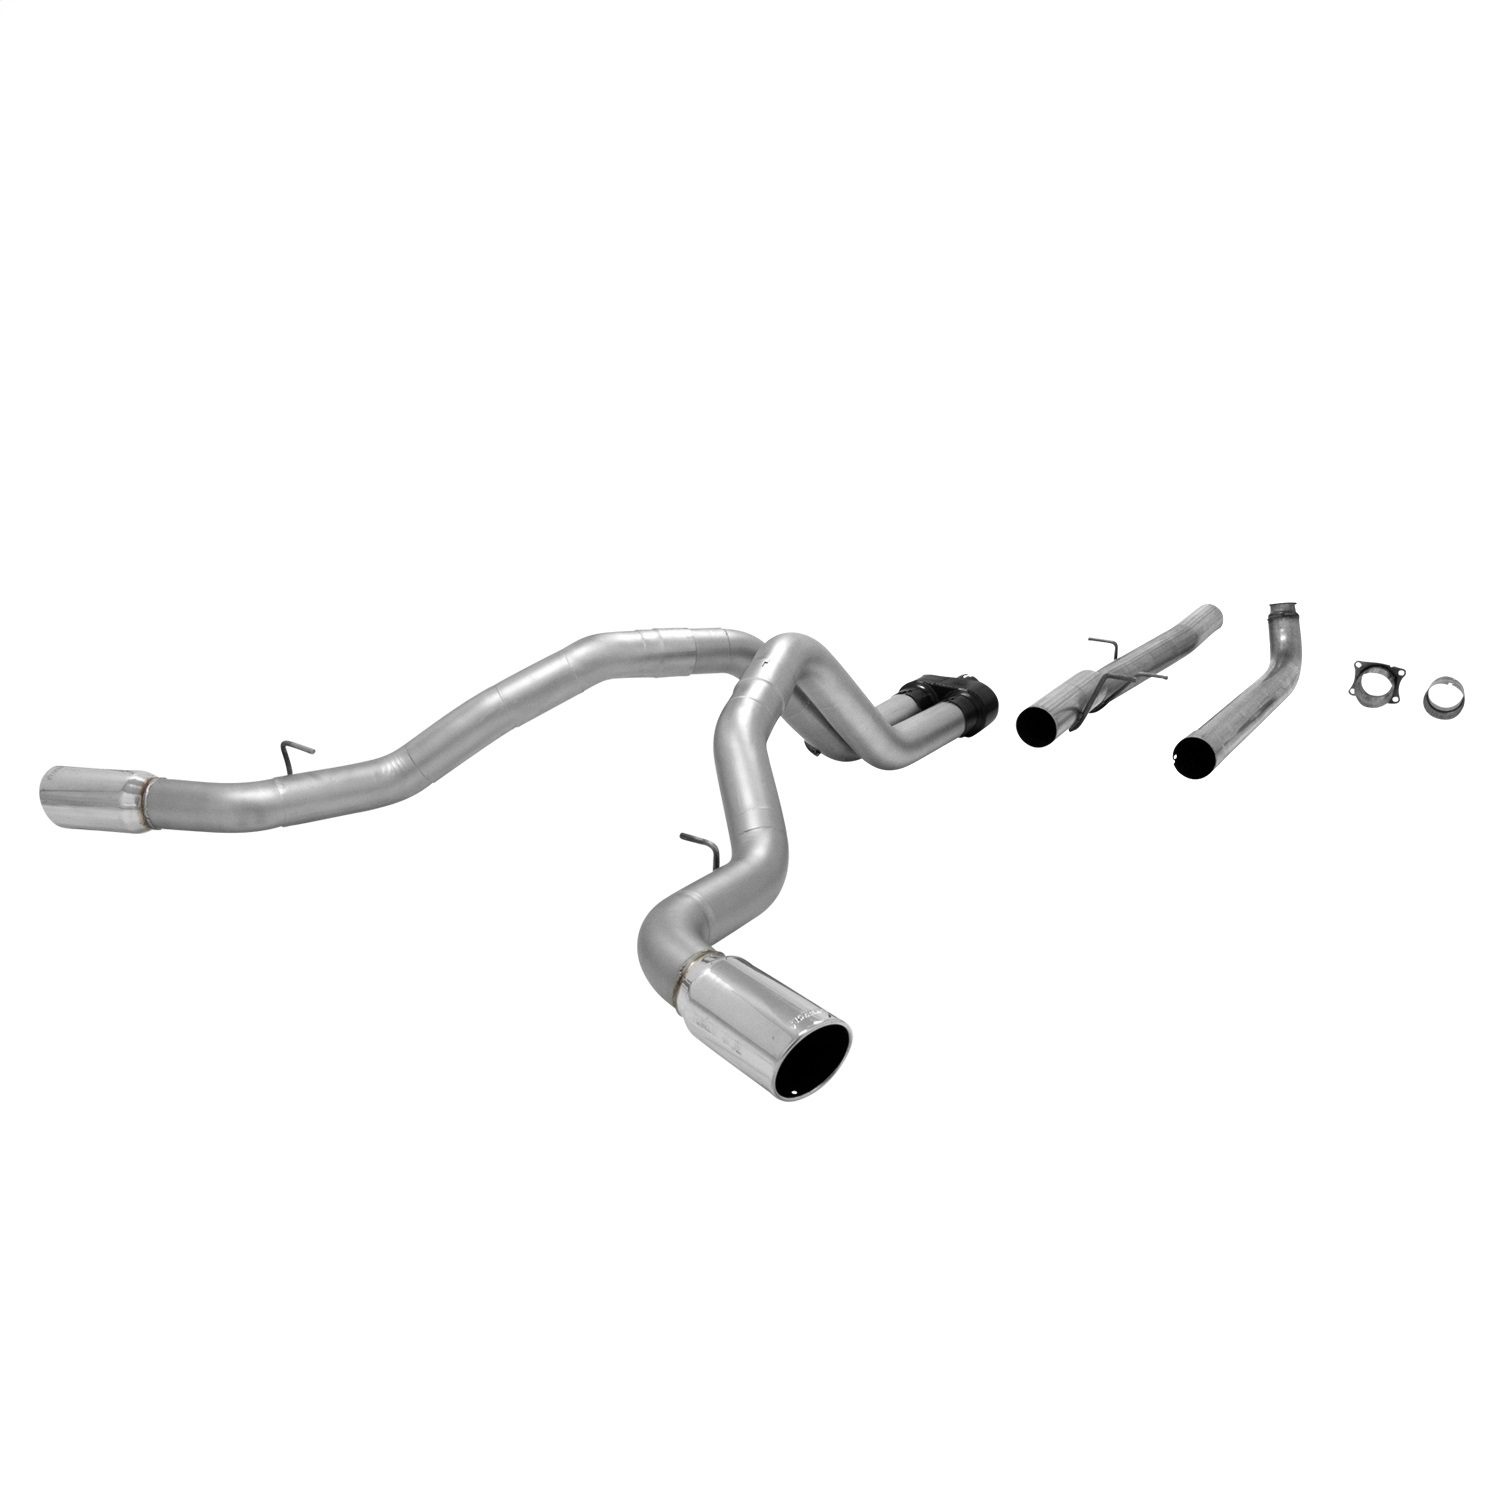 Flowmaster Flowmaster 817643 American Thunder Downpipe Back Exhaust System